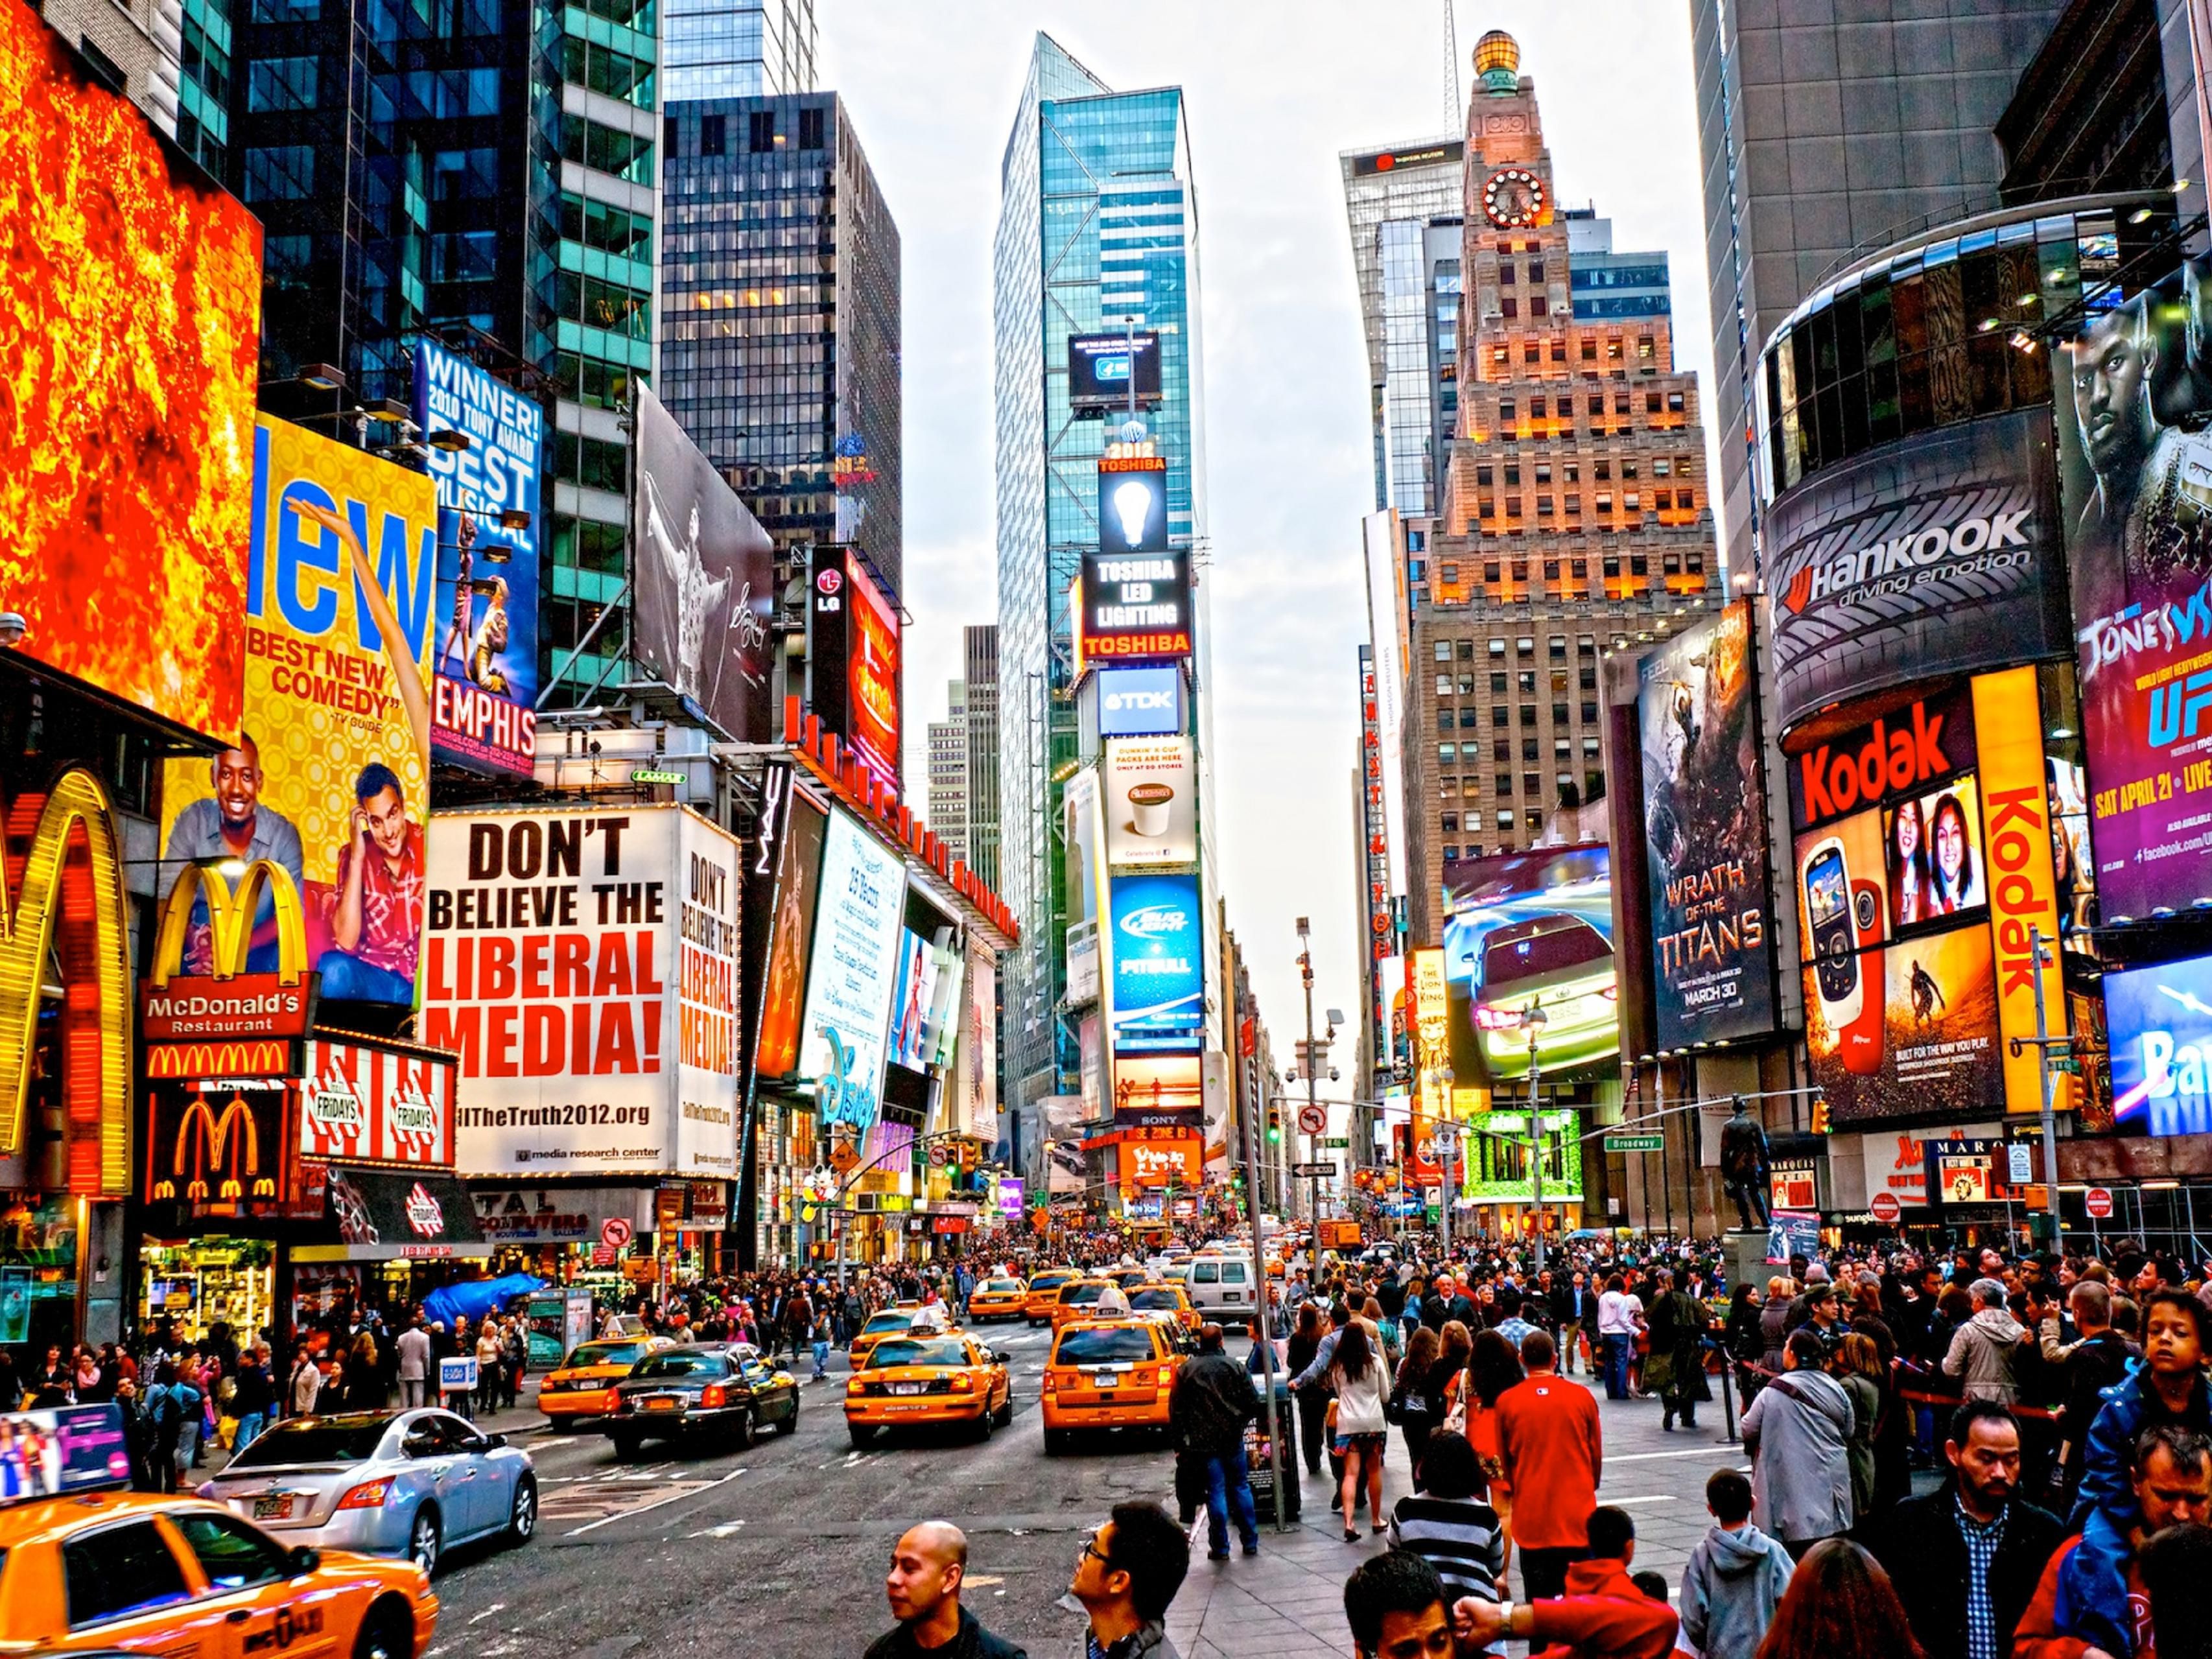 Must see attraction Times Square just few blocks away